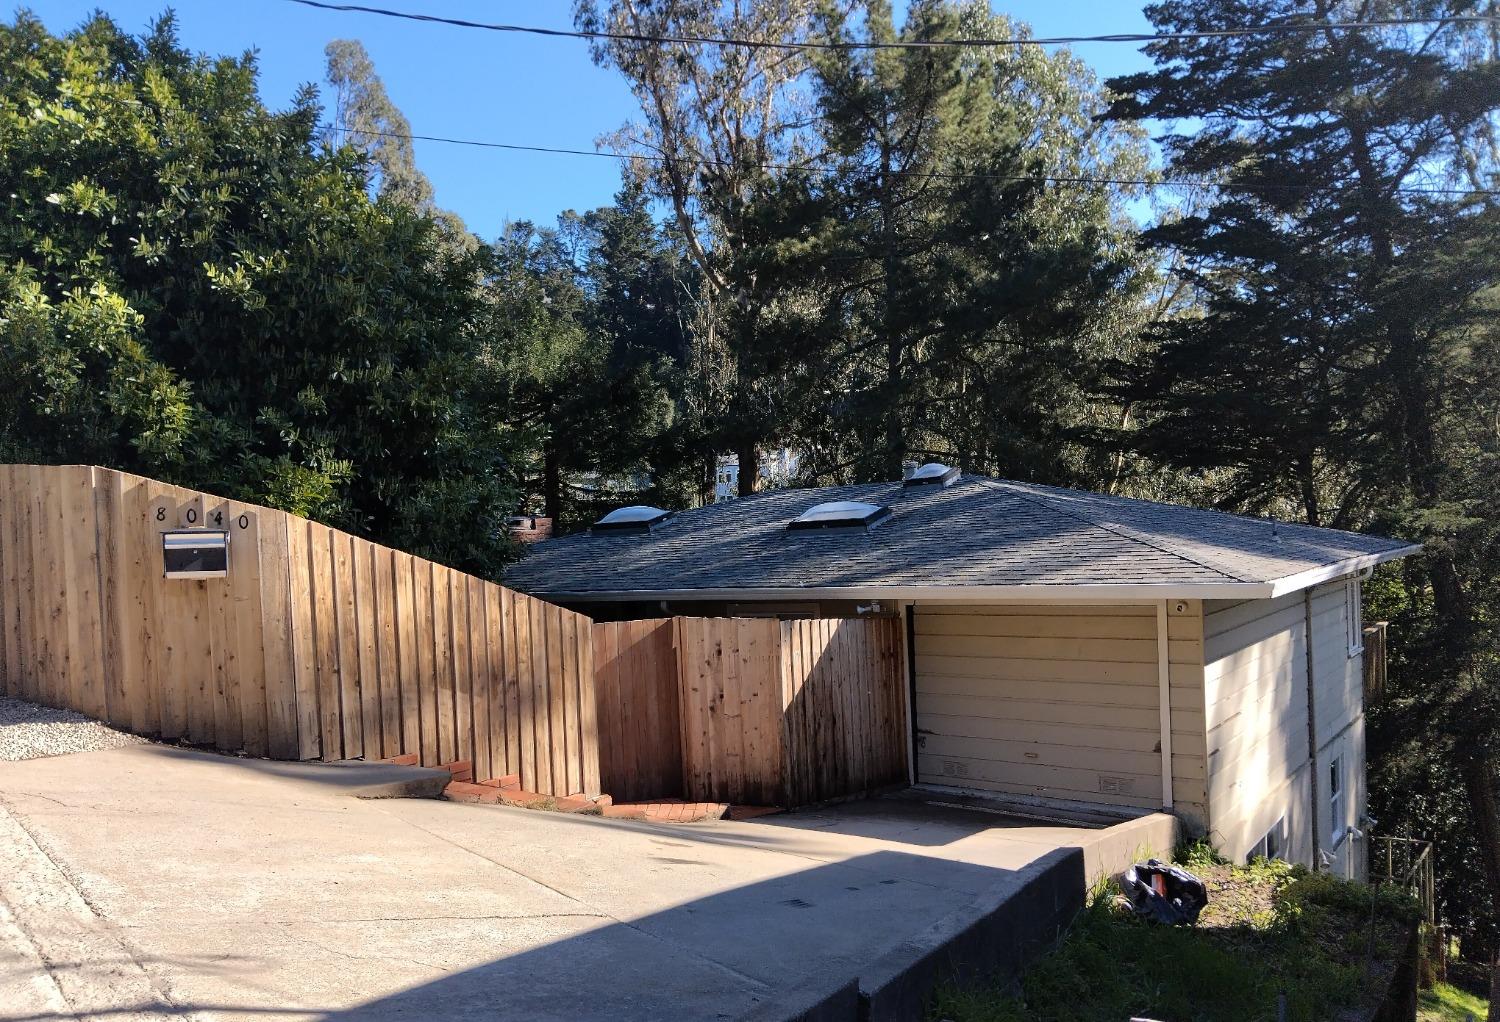 Photo of 8040 Shepherd Canyon Rd in Oakland, CA